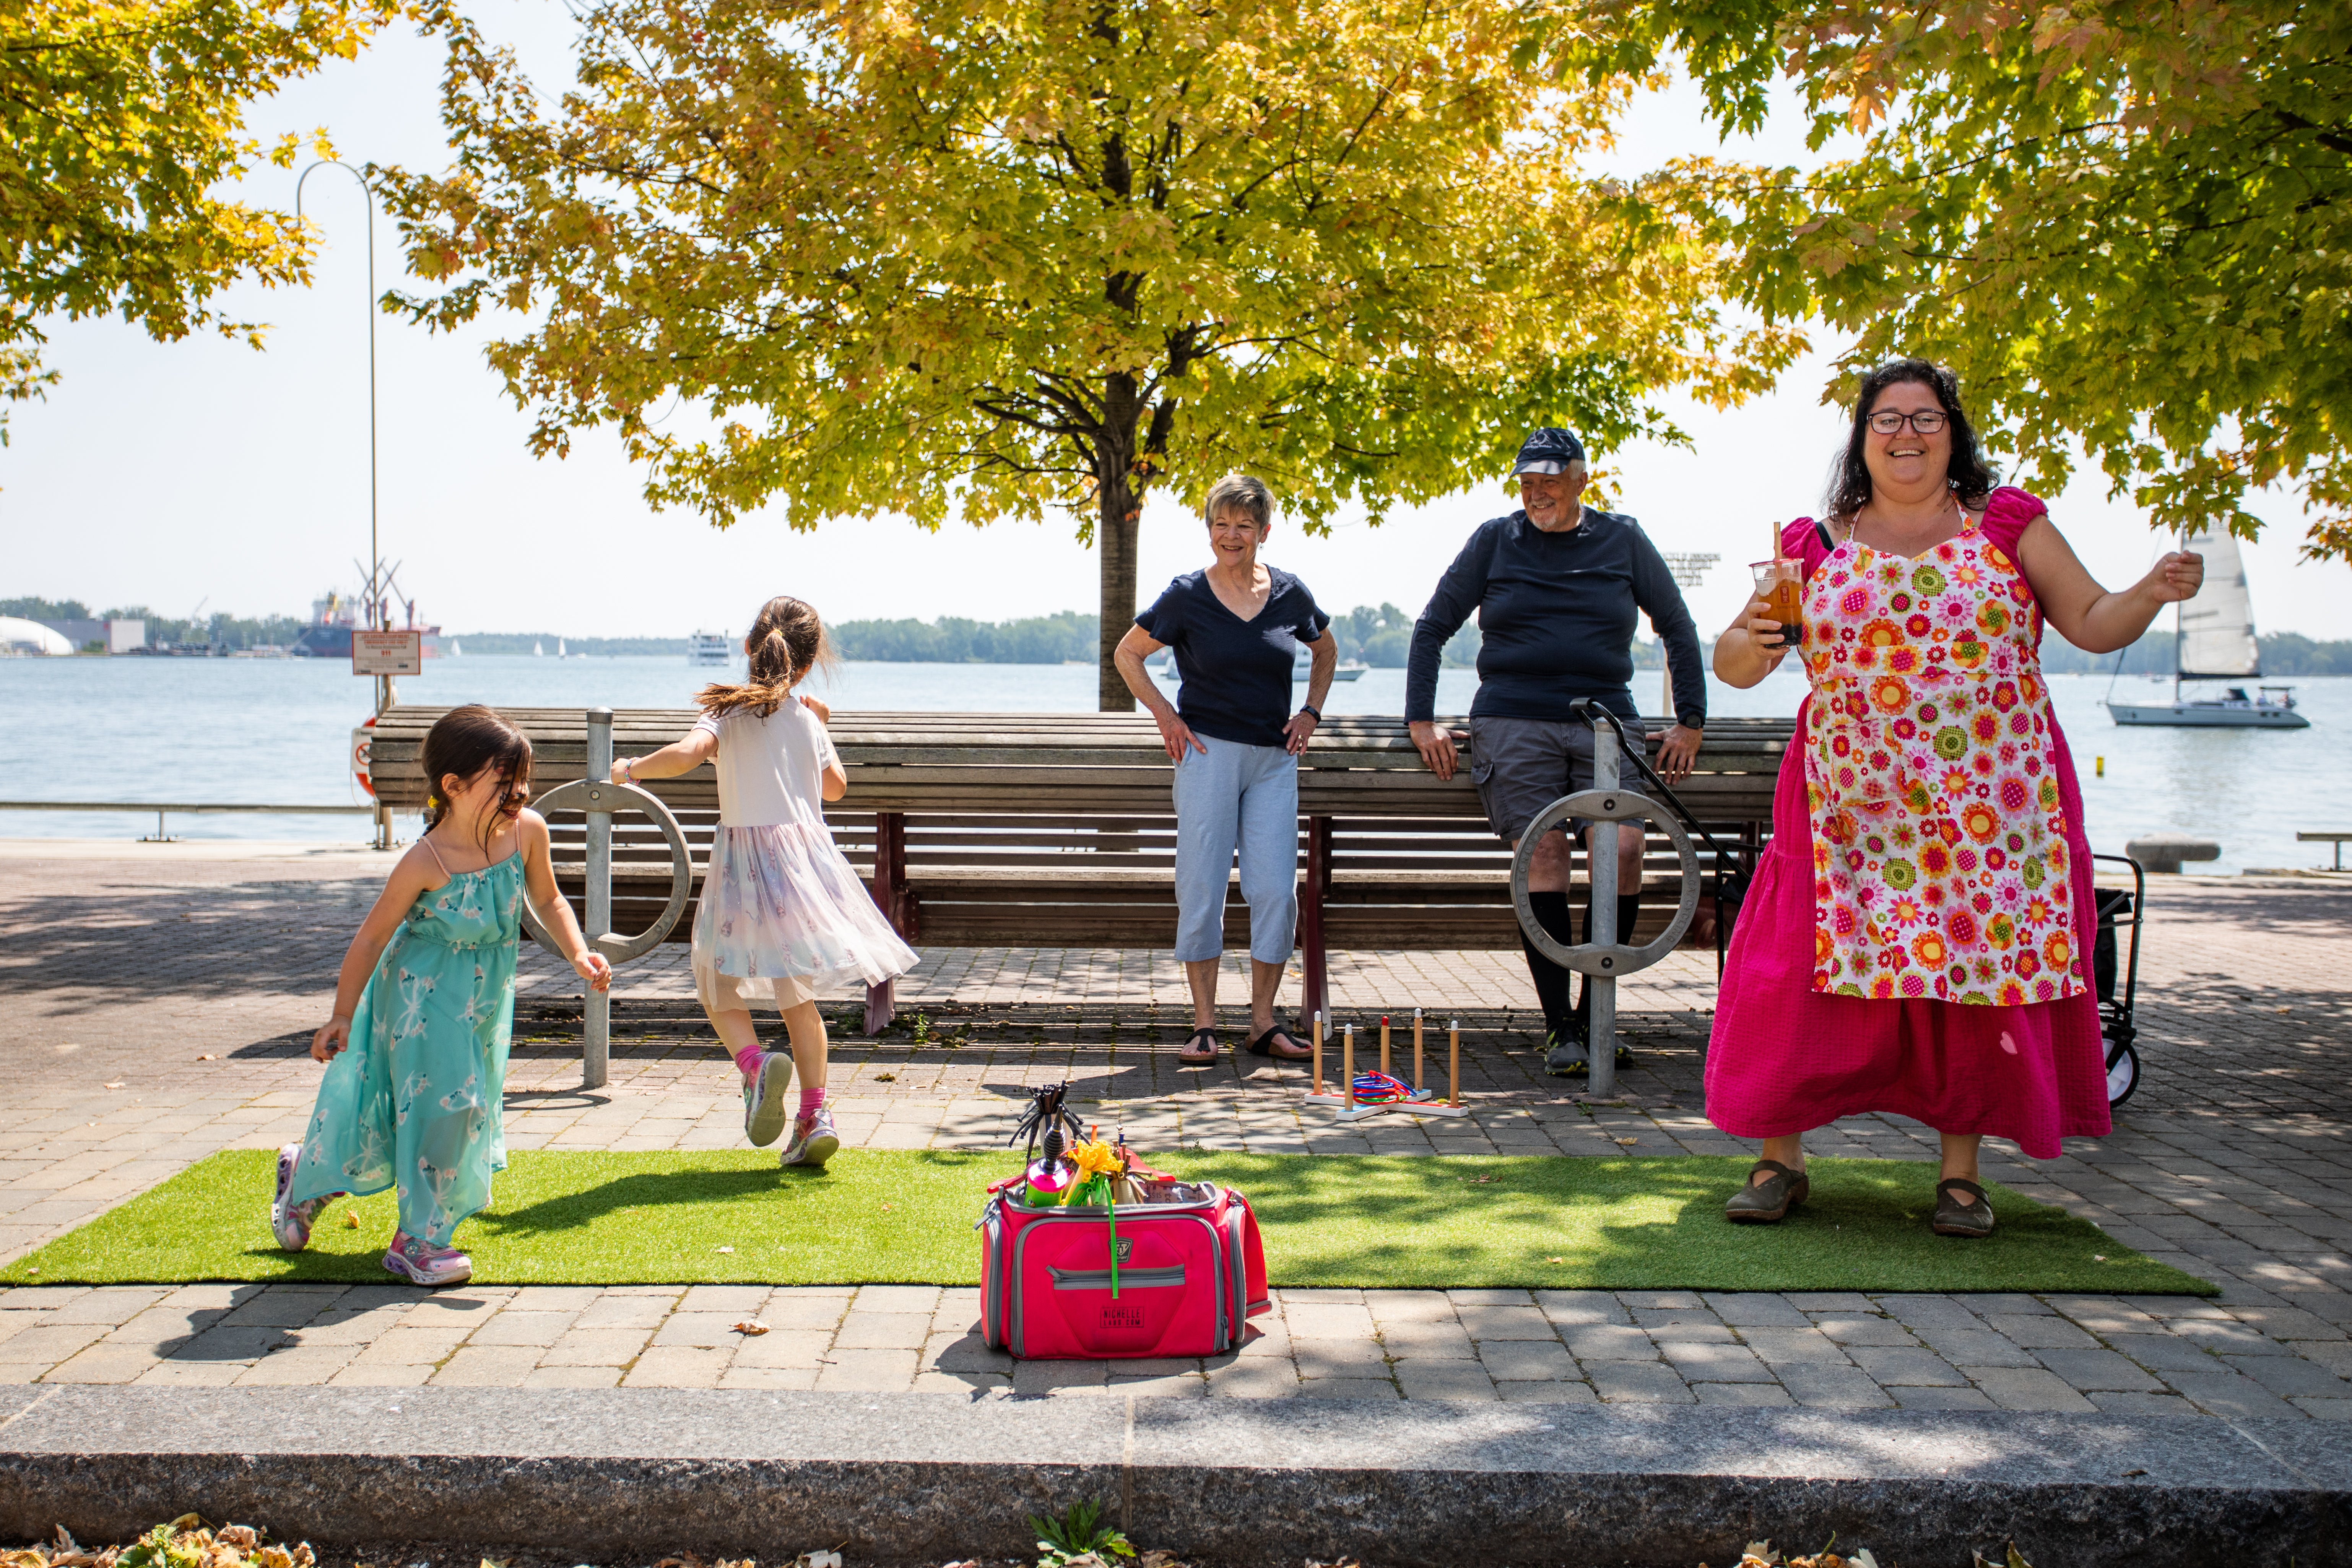 A woman and children dance in a public space on a sunny day by the water. 